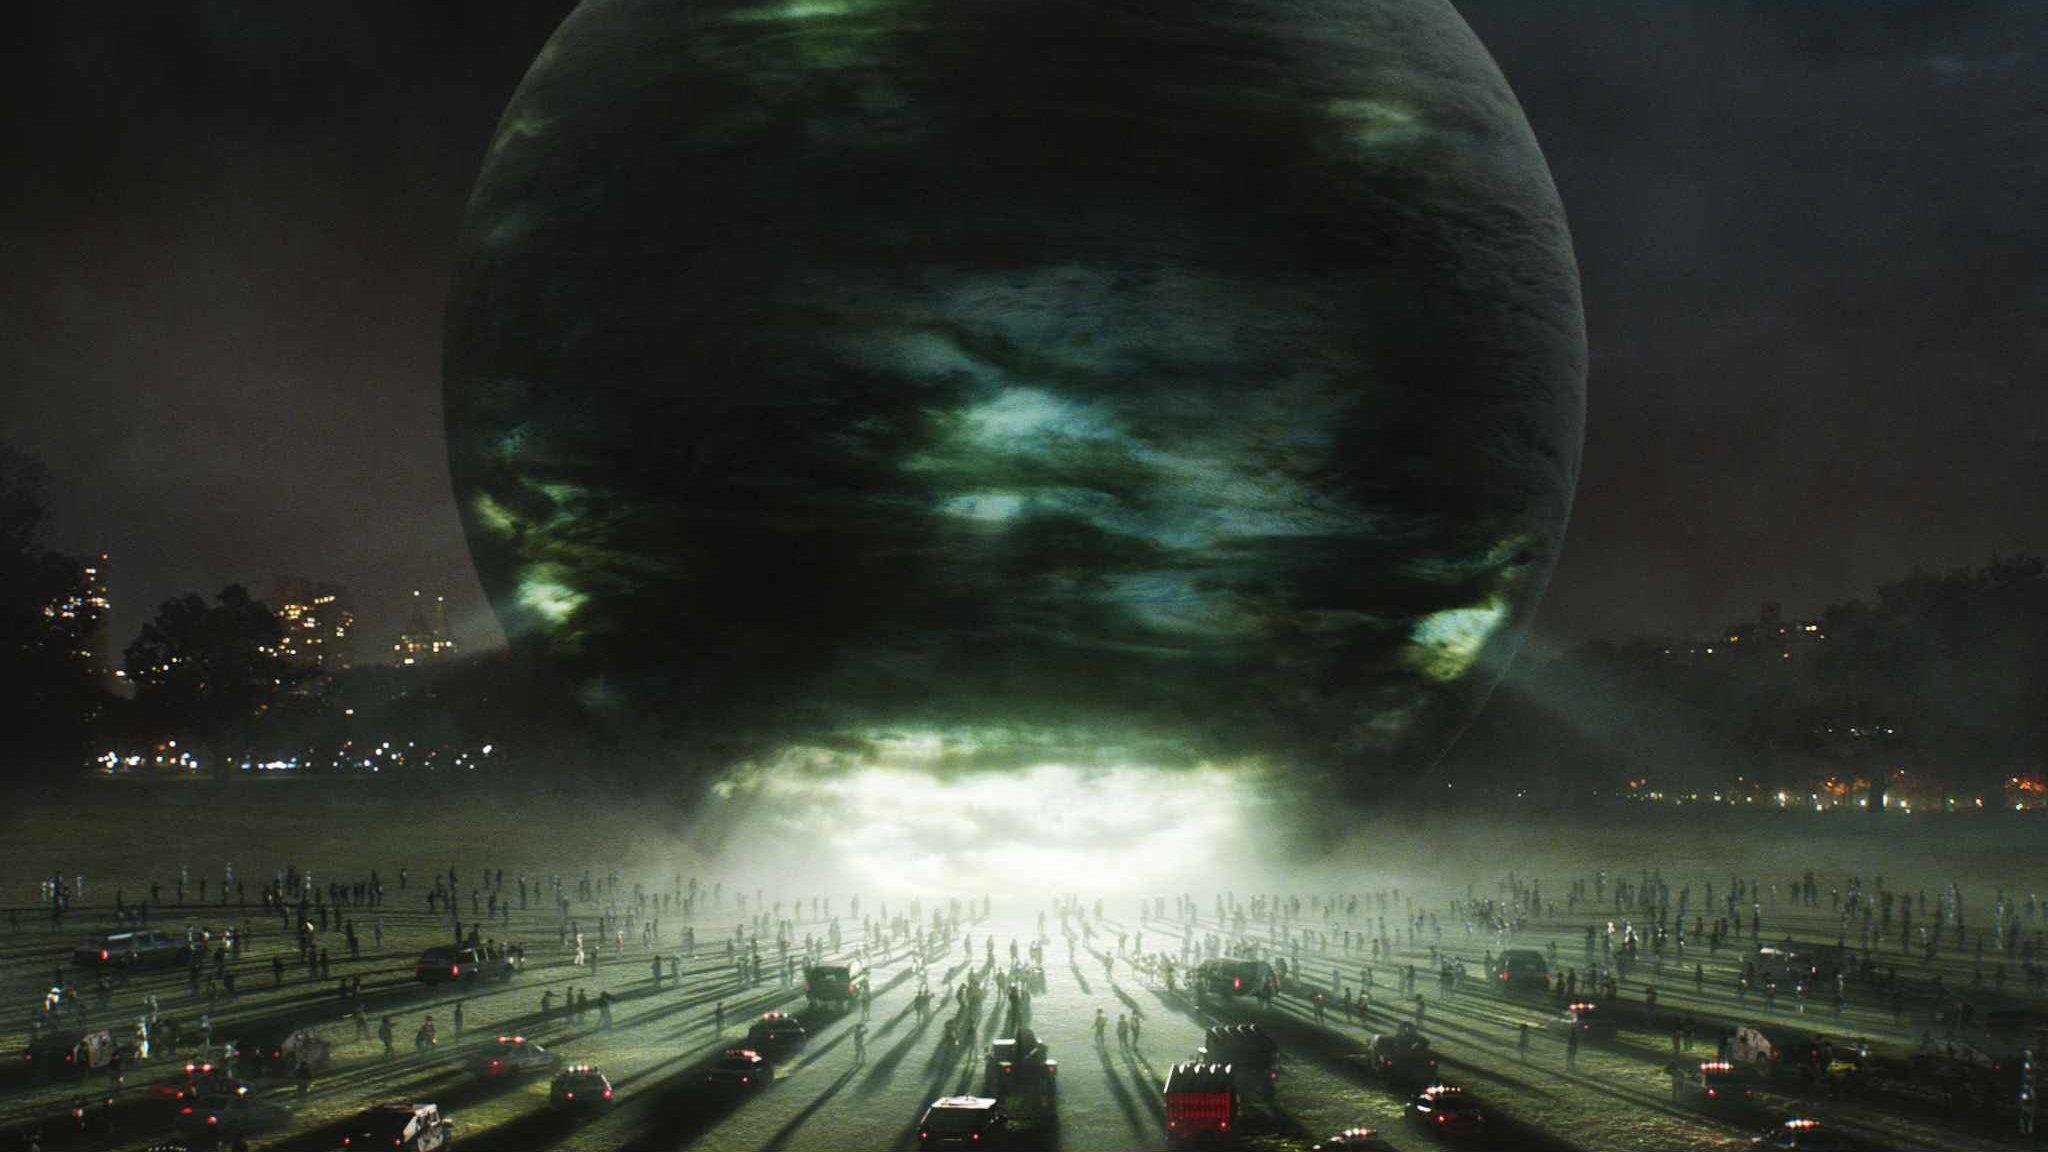 The arrival of the sphere in Central Park in The Day the Earth Stood Still (2008)